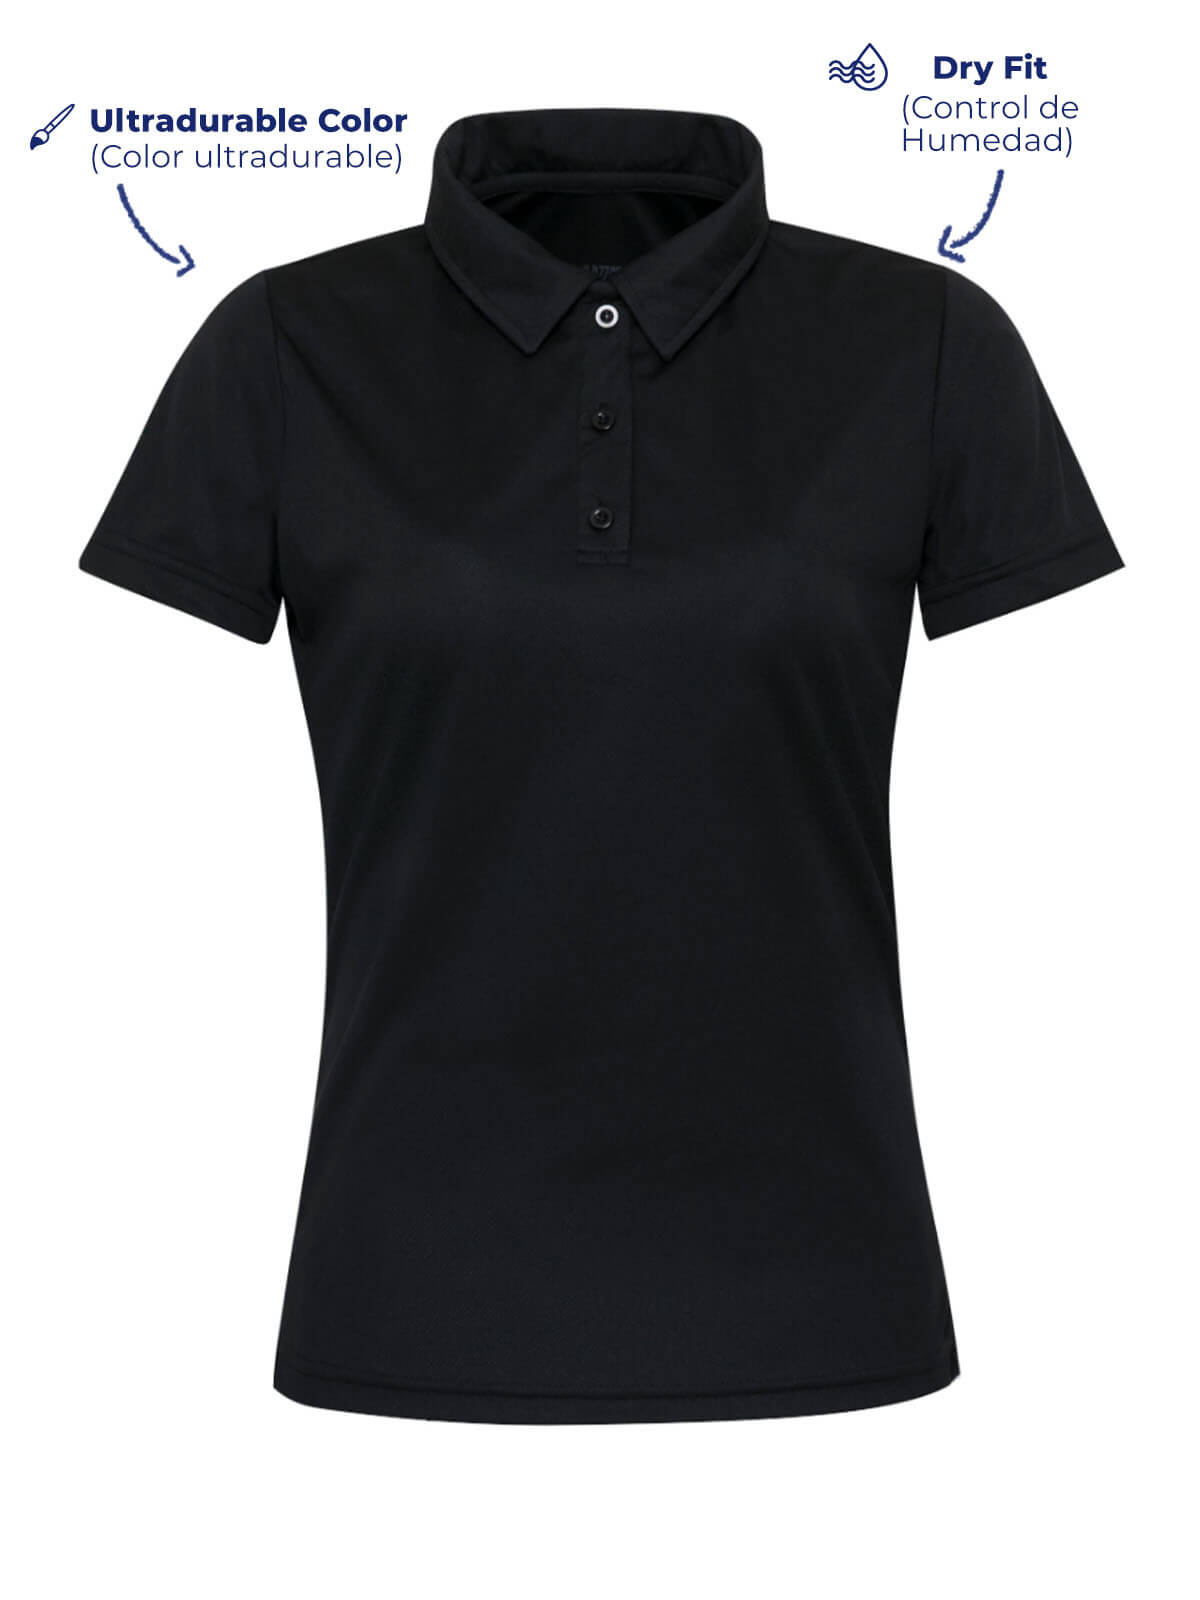 P900 black polo shirt for women front view